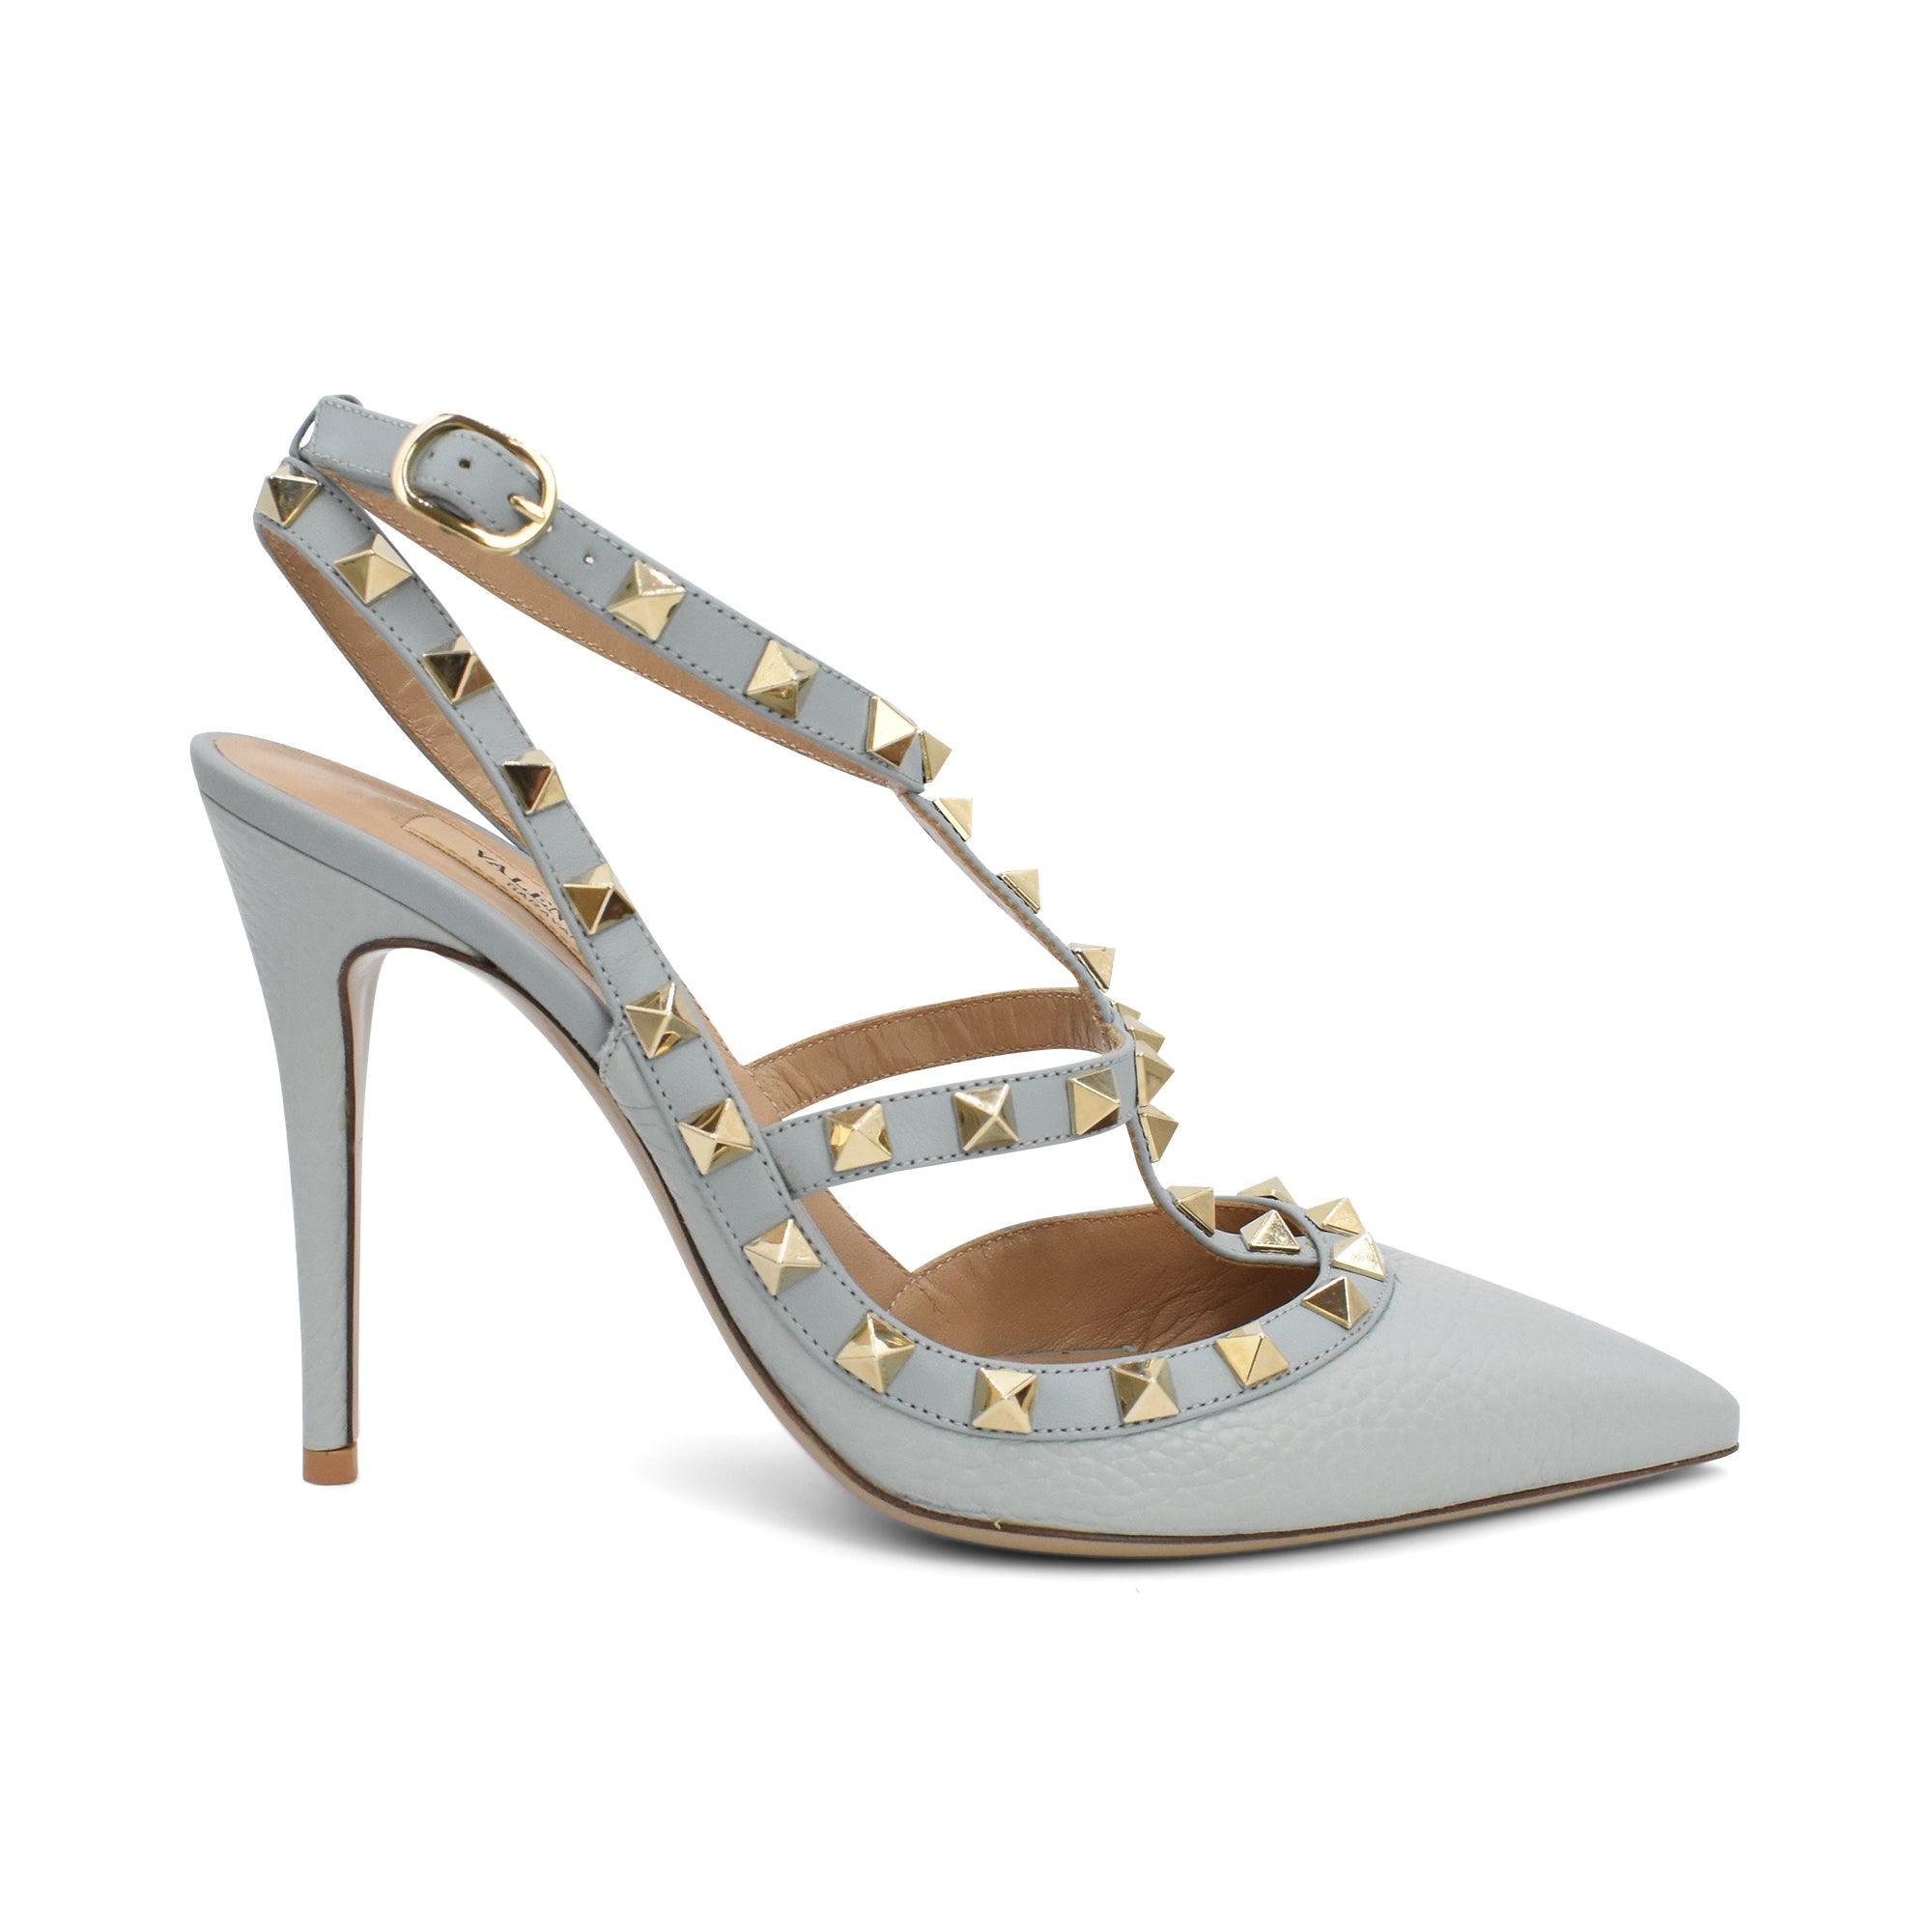 Valentino Rockstud Cage Geels - Women's 37.5 - Fashionably Yours